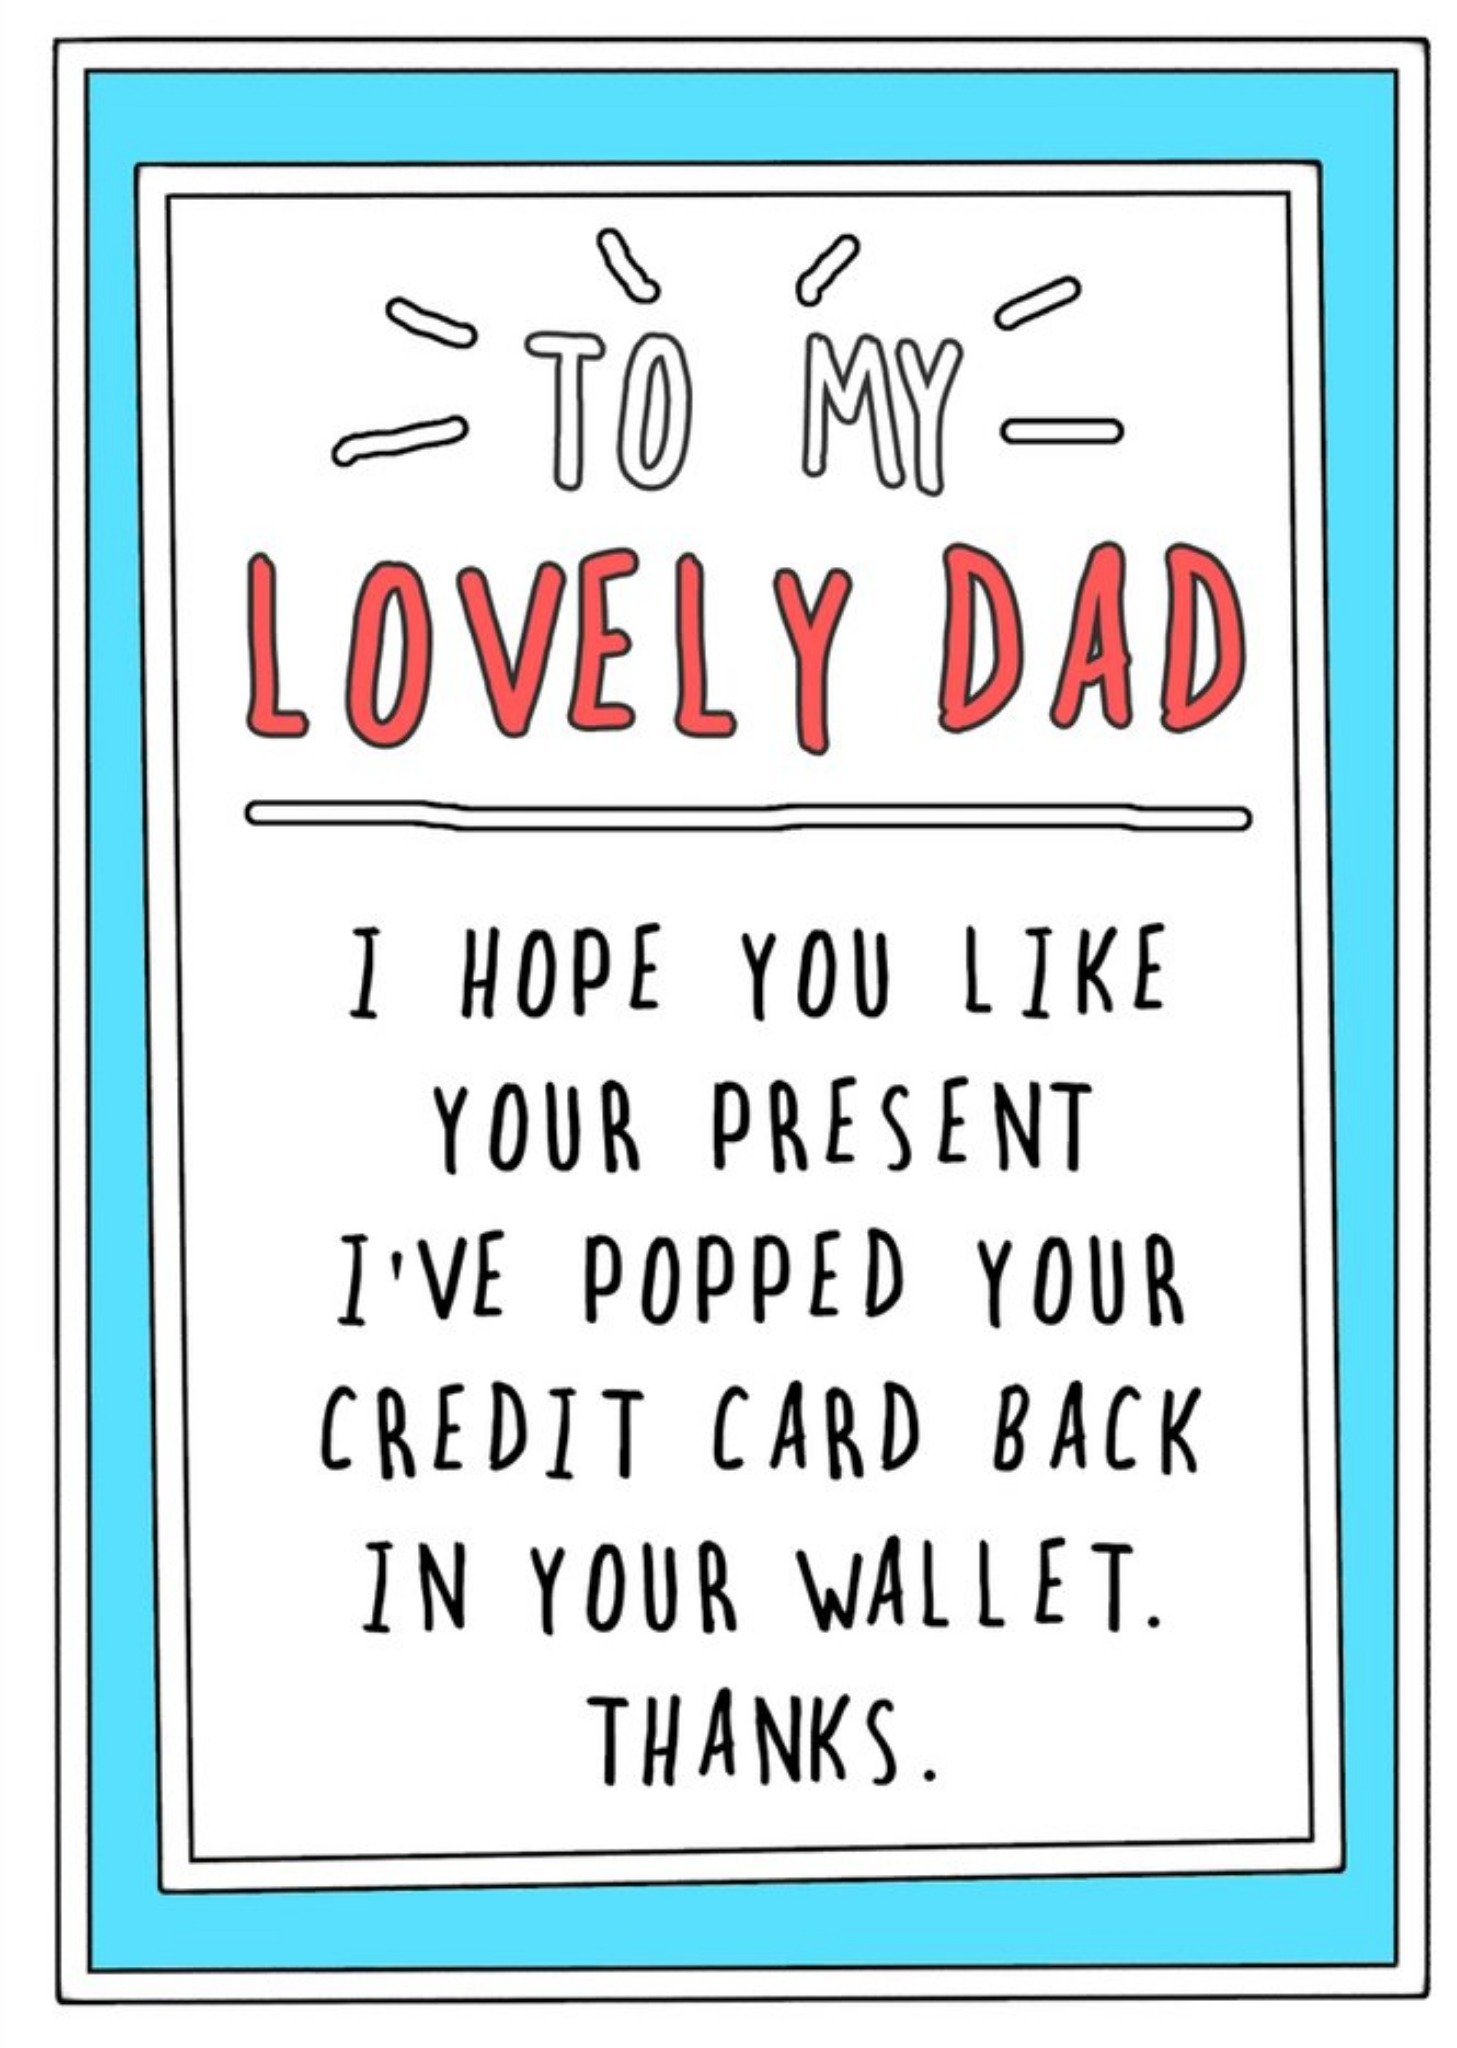 Go La La Funny Cheeky To My Lovely Dad I Hope You Like Your Present Your Credit Card Thanks Card, La